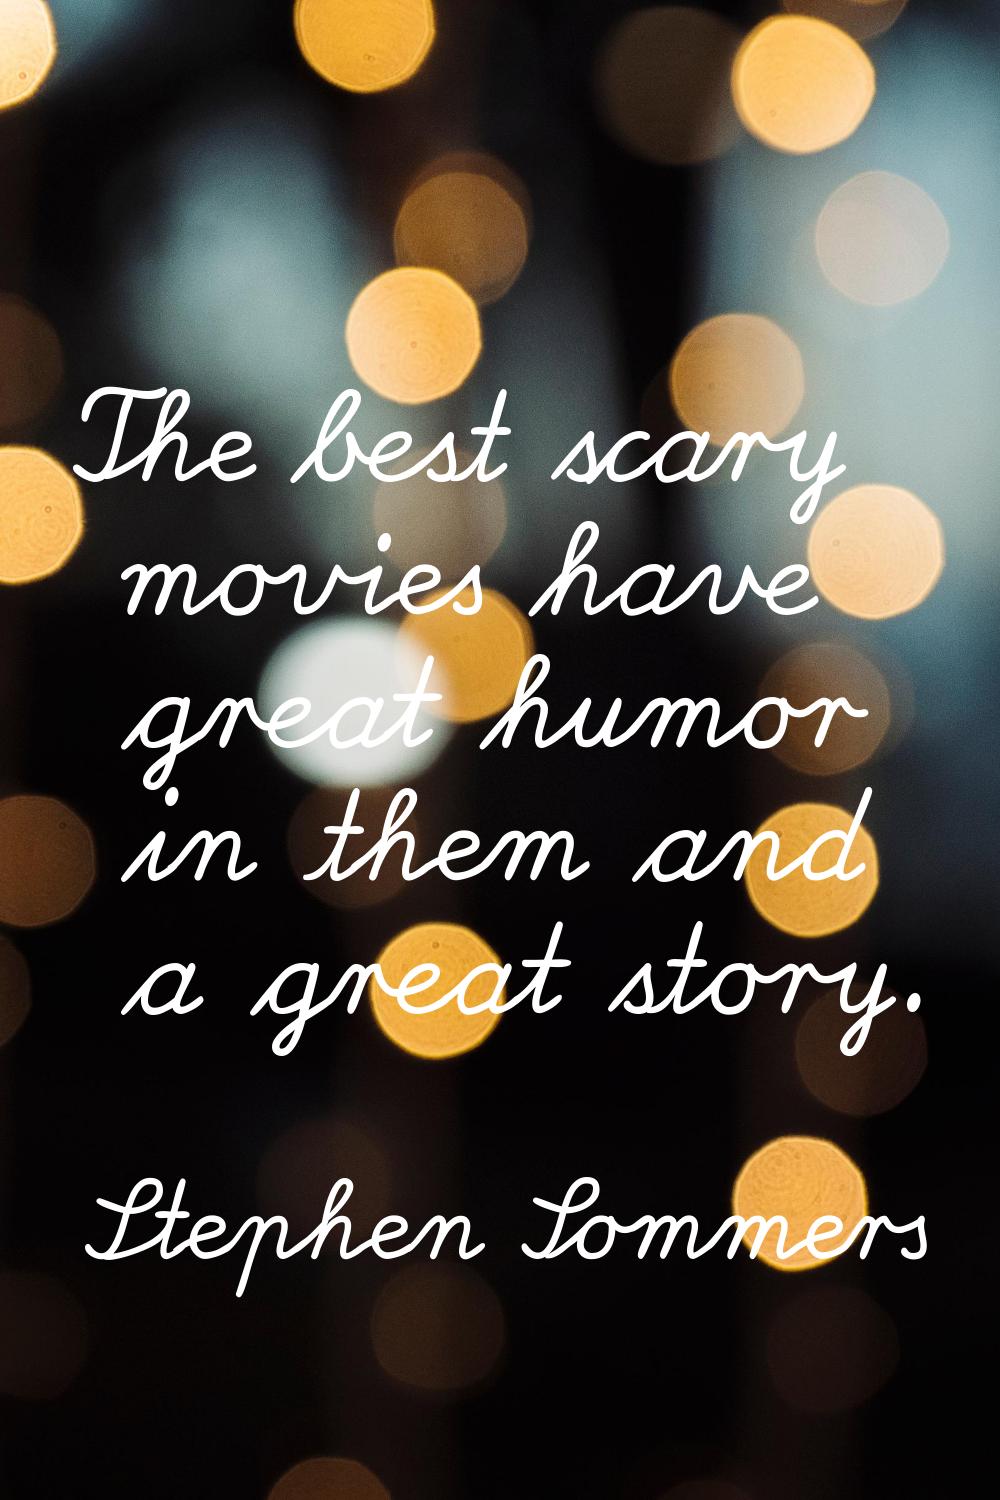 The best scary movies have great humor in them and a great story.